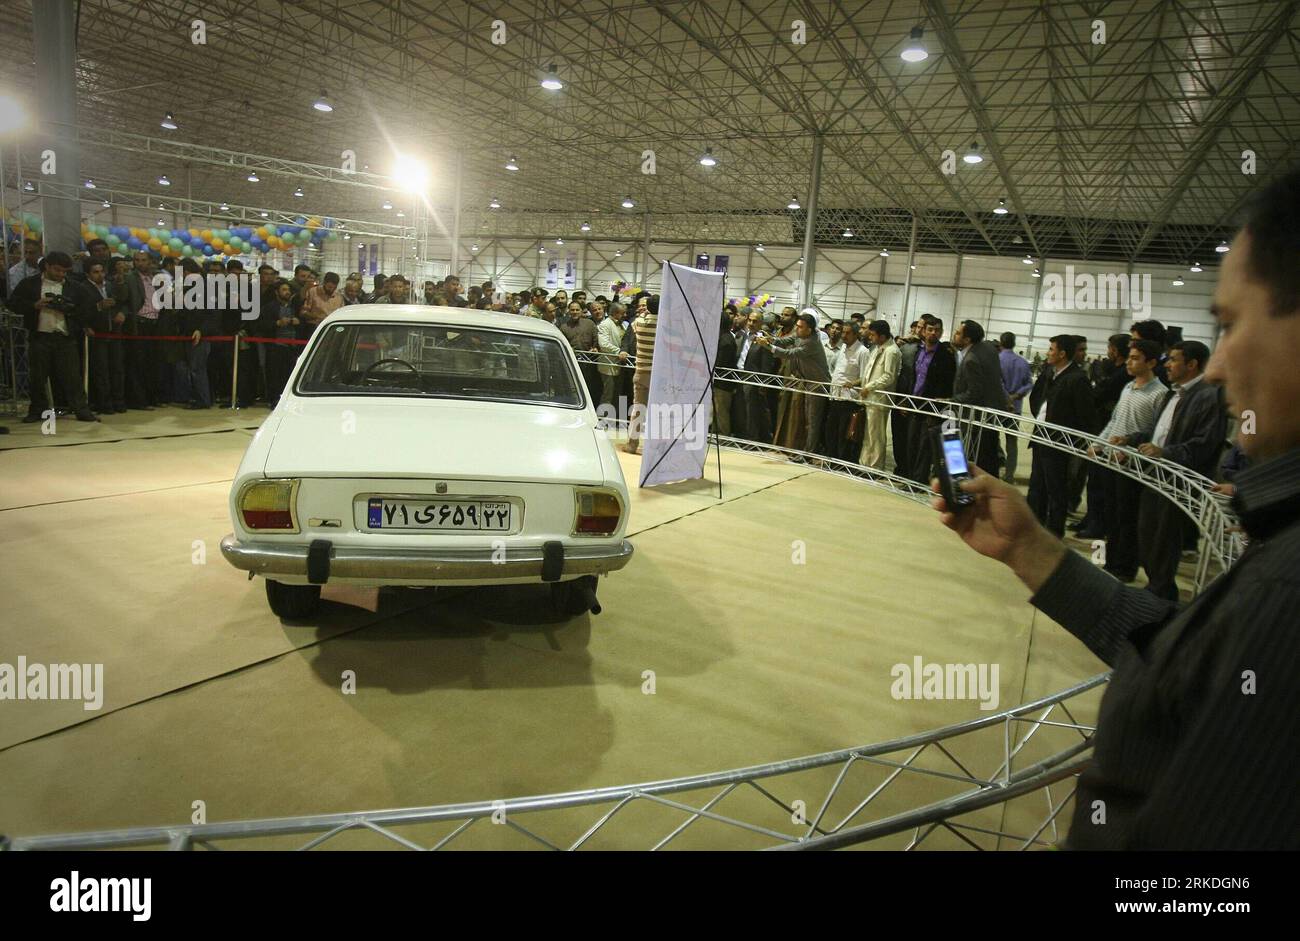 Bildnummer: 54946749  Datum: 23.02.2011  Copyright: imago/Xinhua (110224) -- TEHRAN, Feb. 24, 2011 (Xinhua) -- Iranian president s car is displayed during the First International Car Exhibition in Arvand Free Zone in southwest Iran, Feb. 23, 2011. Iranian President Mahmoud Ahmadinejad s ancient Peugeot 504 is put up to auction for charity during the exhibition, which opened here on Wednesday. At the end of last year, Iranian president said he wanted to sell his car to help a housing project in his country. (Xinhua/Ahmad Halabisaz) IRAN-PRESIDENT S CAR-EXHIBITION PUBLICATIONxNOTxINxCHN Objekte Stock Photo